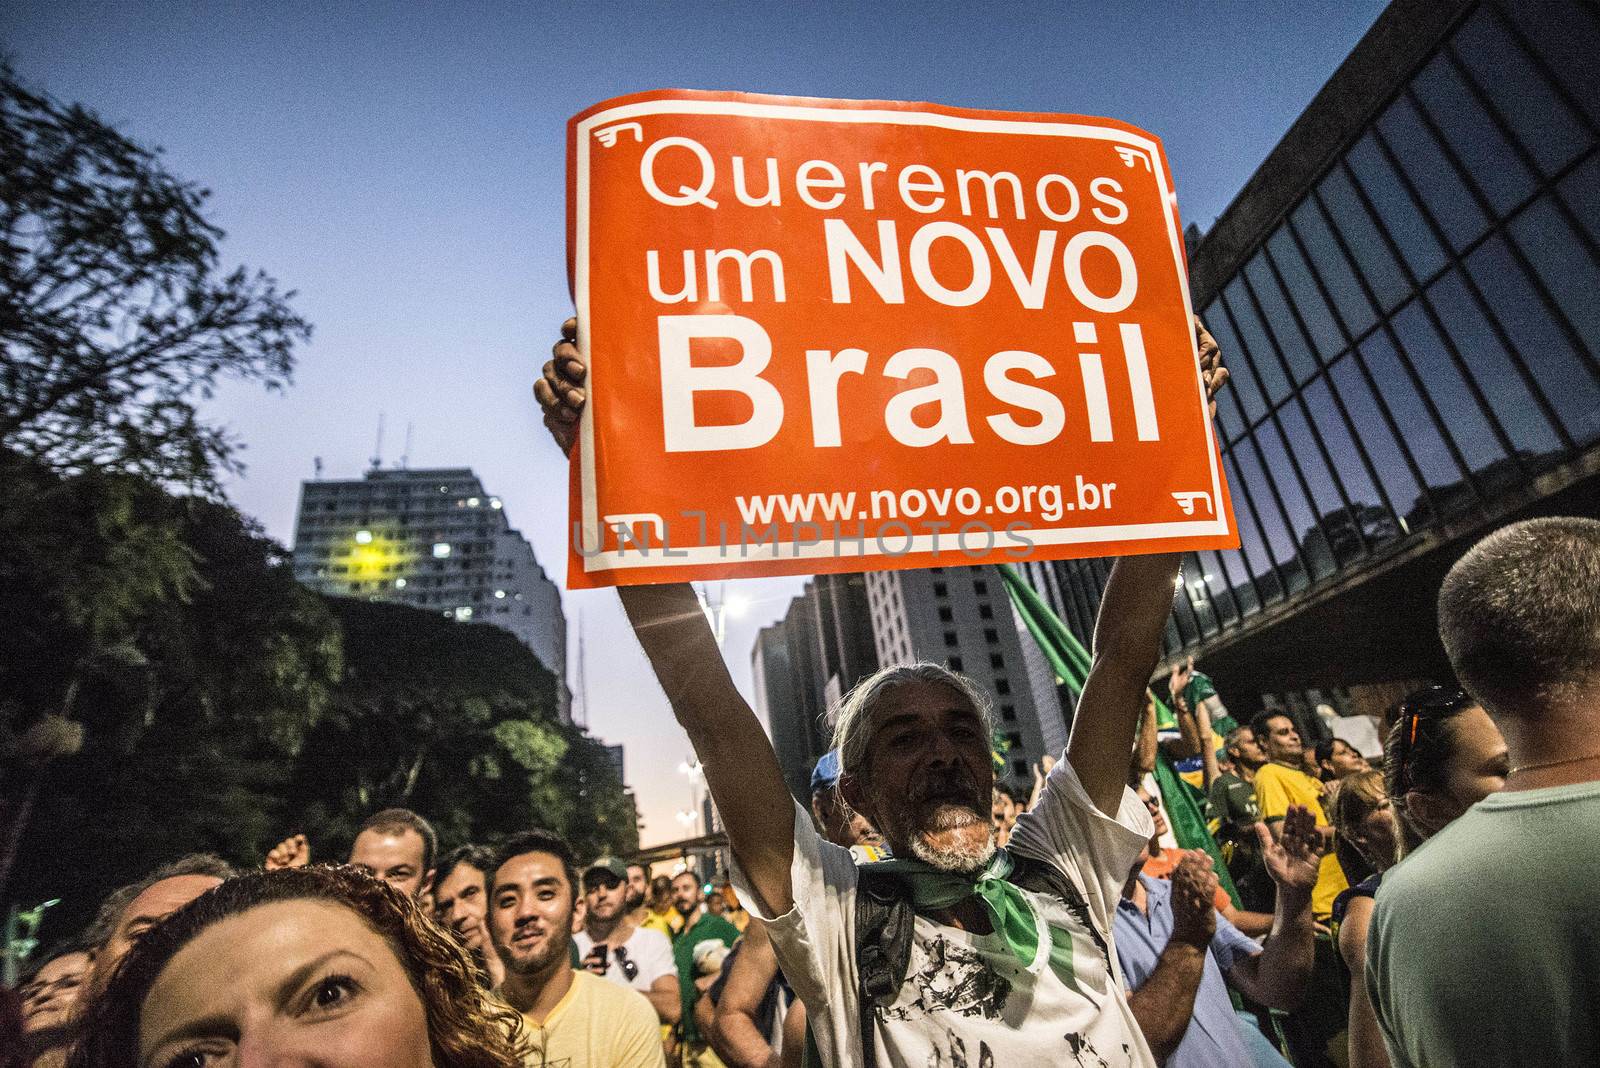 BRAZIl, Sao Paulo: A man holds a placard which reads We want a new Brazil! as thousands of activists supporting the impeachment of President Dilma Rousseff take part in a protest in Sao Paulo, on April 17, 2016. Brazilian lawmakers on Sunday reached the two thirds majority necessary to authorize impeachment proceedings against President Dilma Rousseff. The lower house vote sends Rousseff's case to the Senate, which can vote to open a trial. A two thirds majority in the upper house would eject her from office. Rousseff, whose approval rating has plunged to a dismal 10 percent, faces charges of embellishing public accounts to mask the budget deficit during her 2014 reelection.